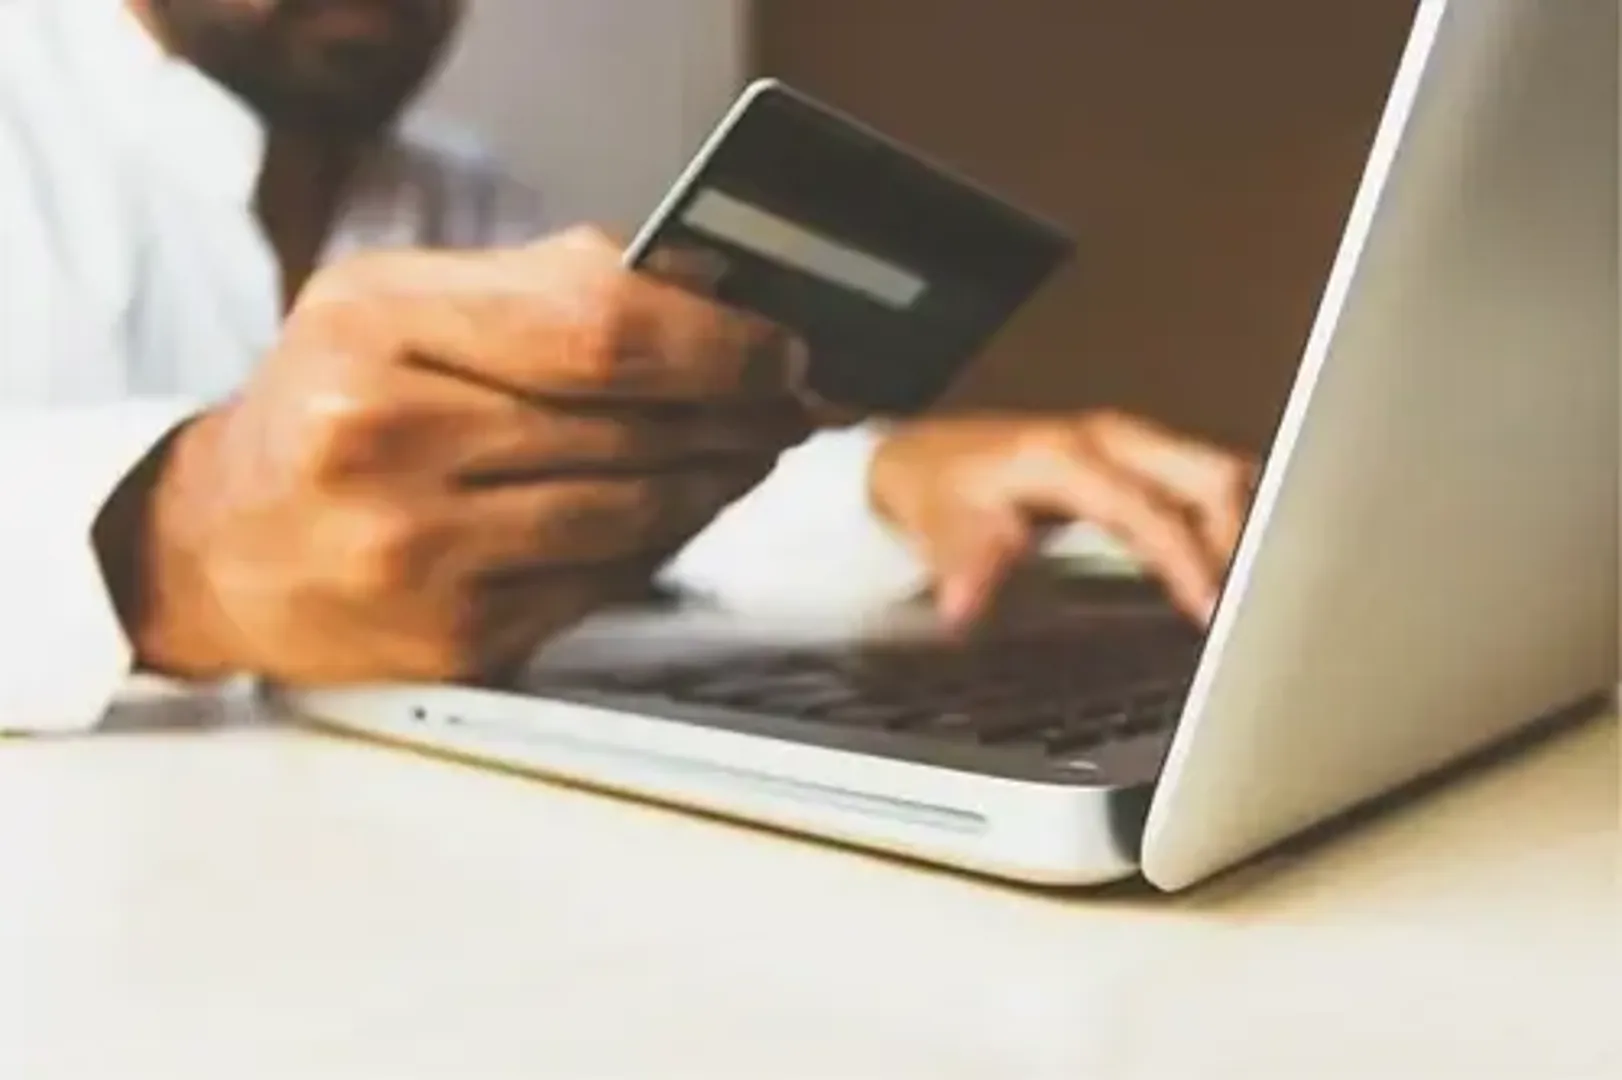 A man making an online purchase using a credit card on his laptop.